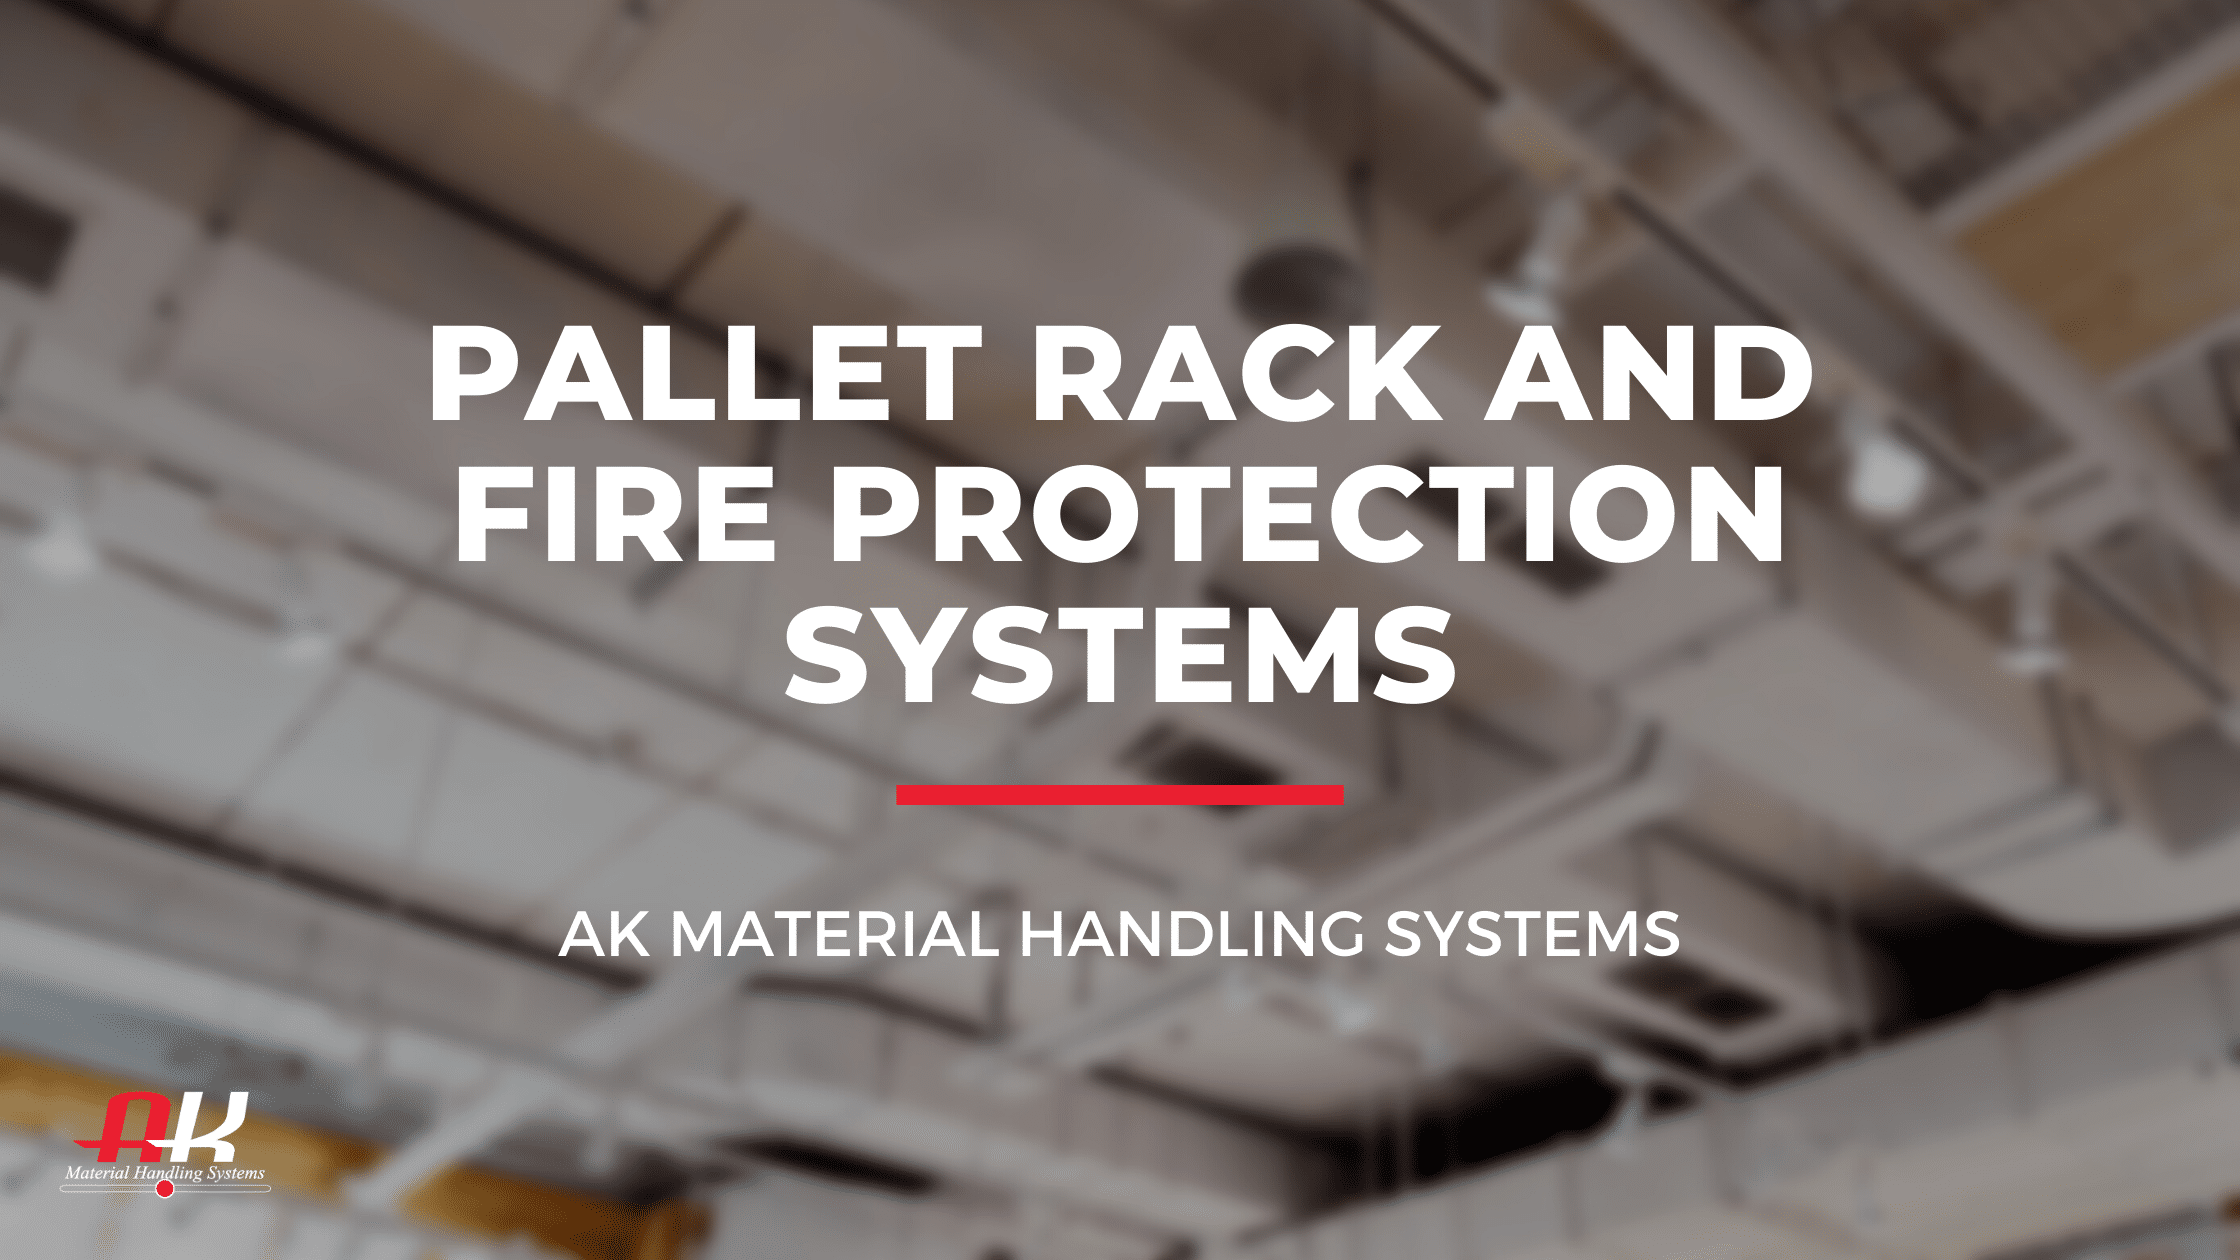 Pallet rack and fire protection systems.